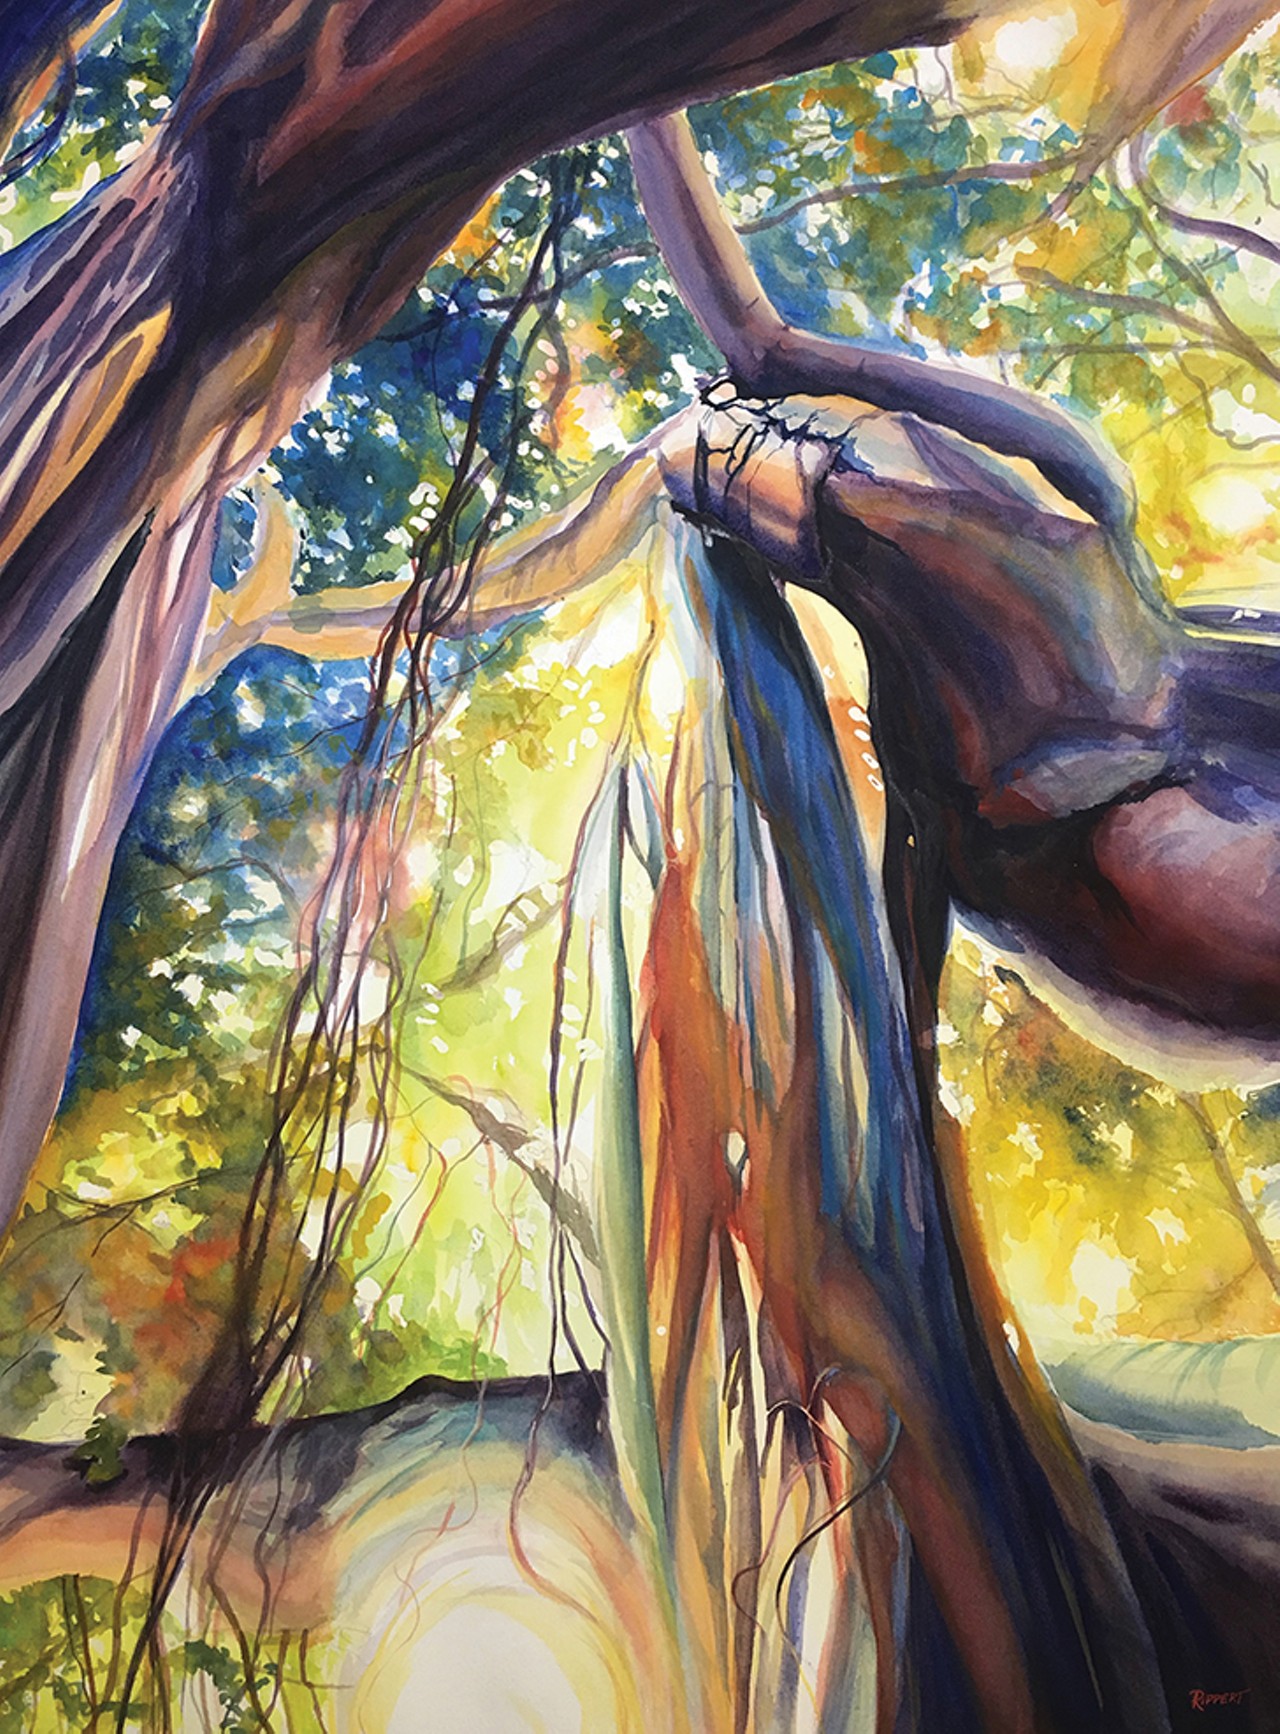 Heather Rippert's "Whispering Vines" in watercolor; Banquet
Photo courtesy of the Dunedin Fine Art Center